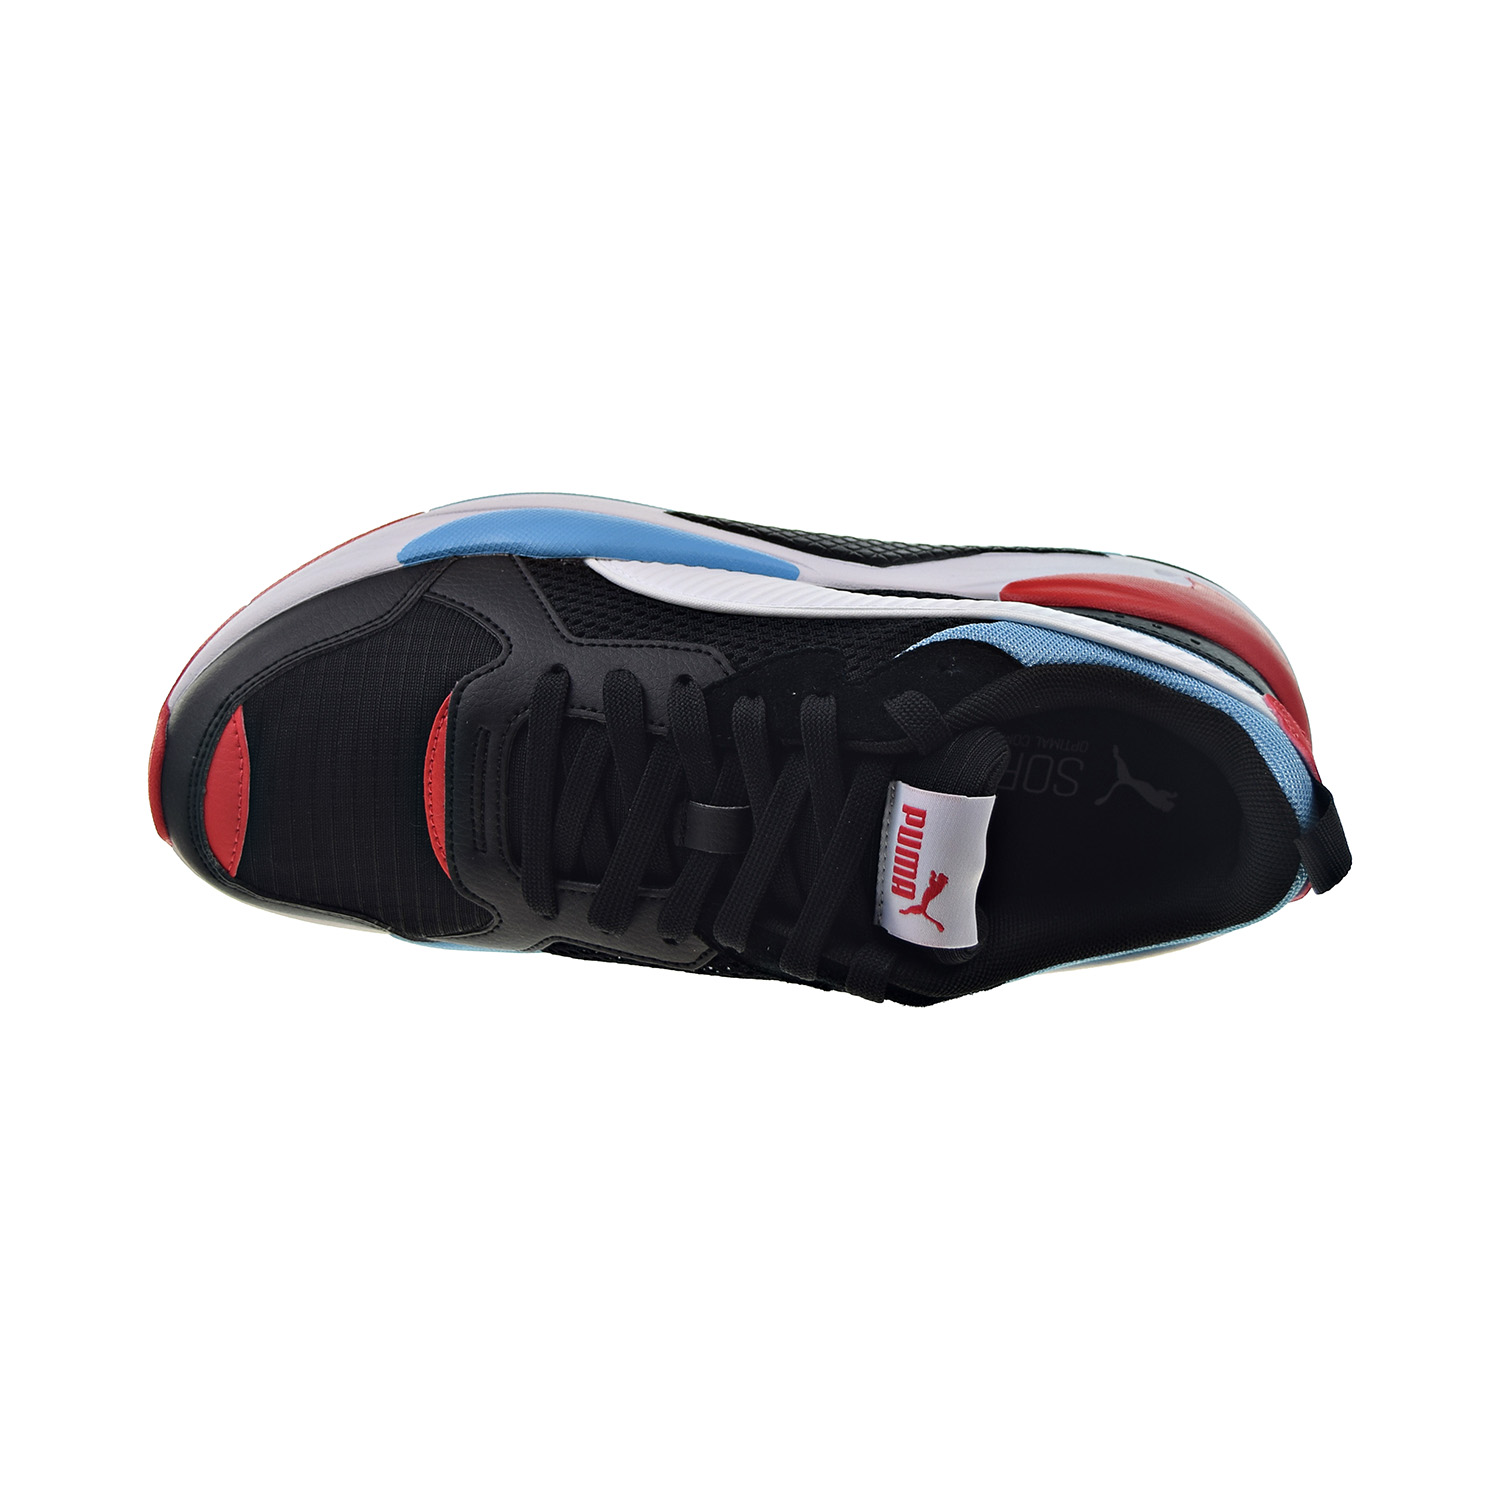 Puma X-Ray Color Block Men's Shoes Black-White-Blue-Red 373582-01 - image 5 of 6